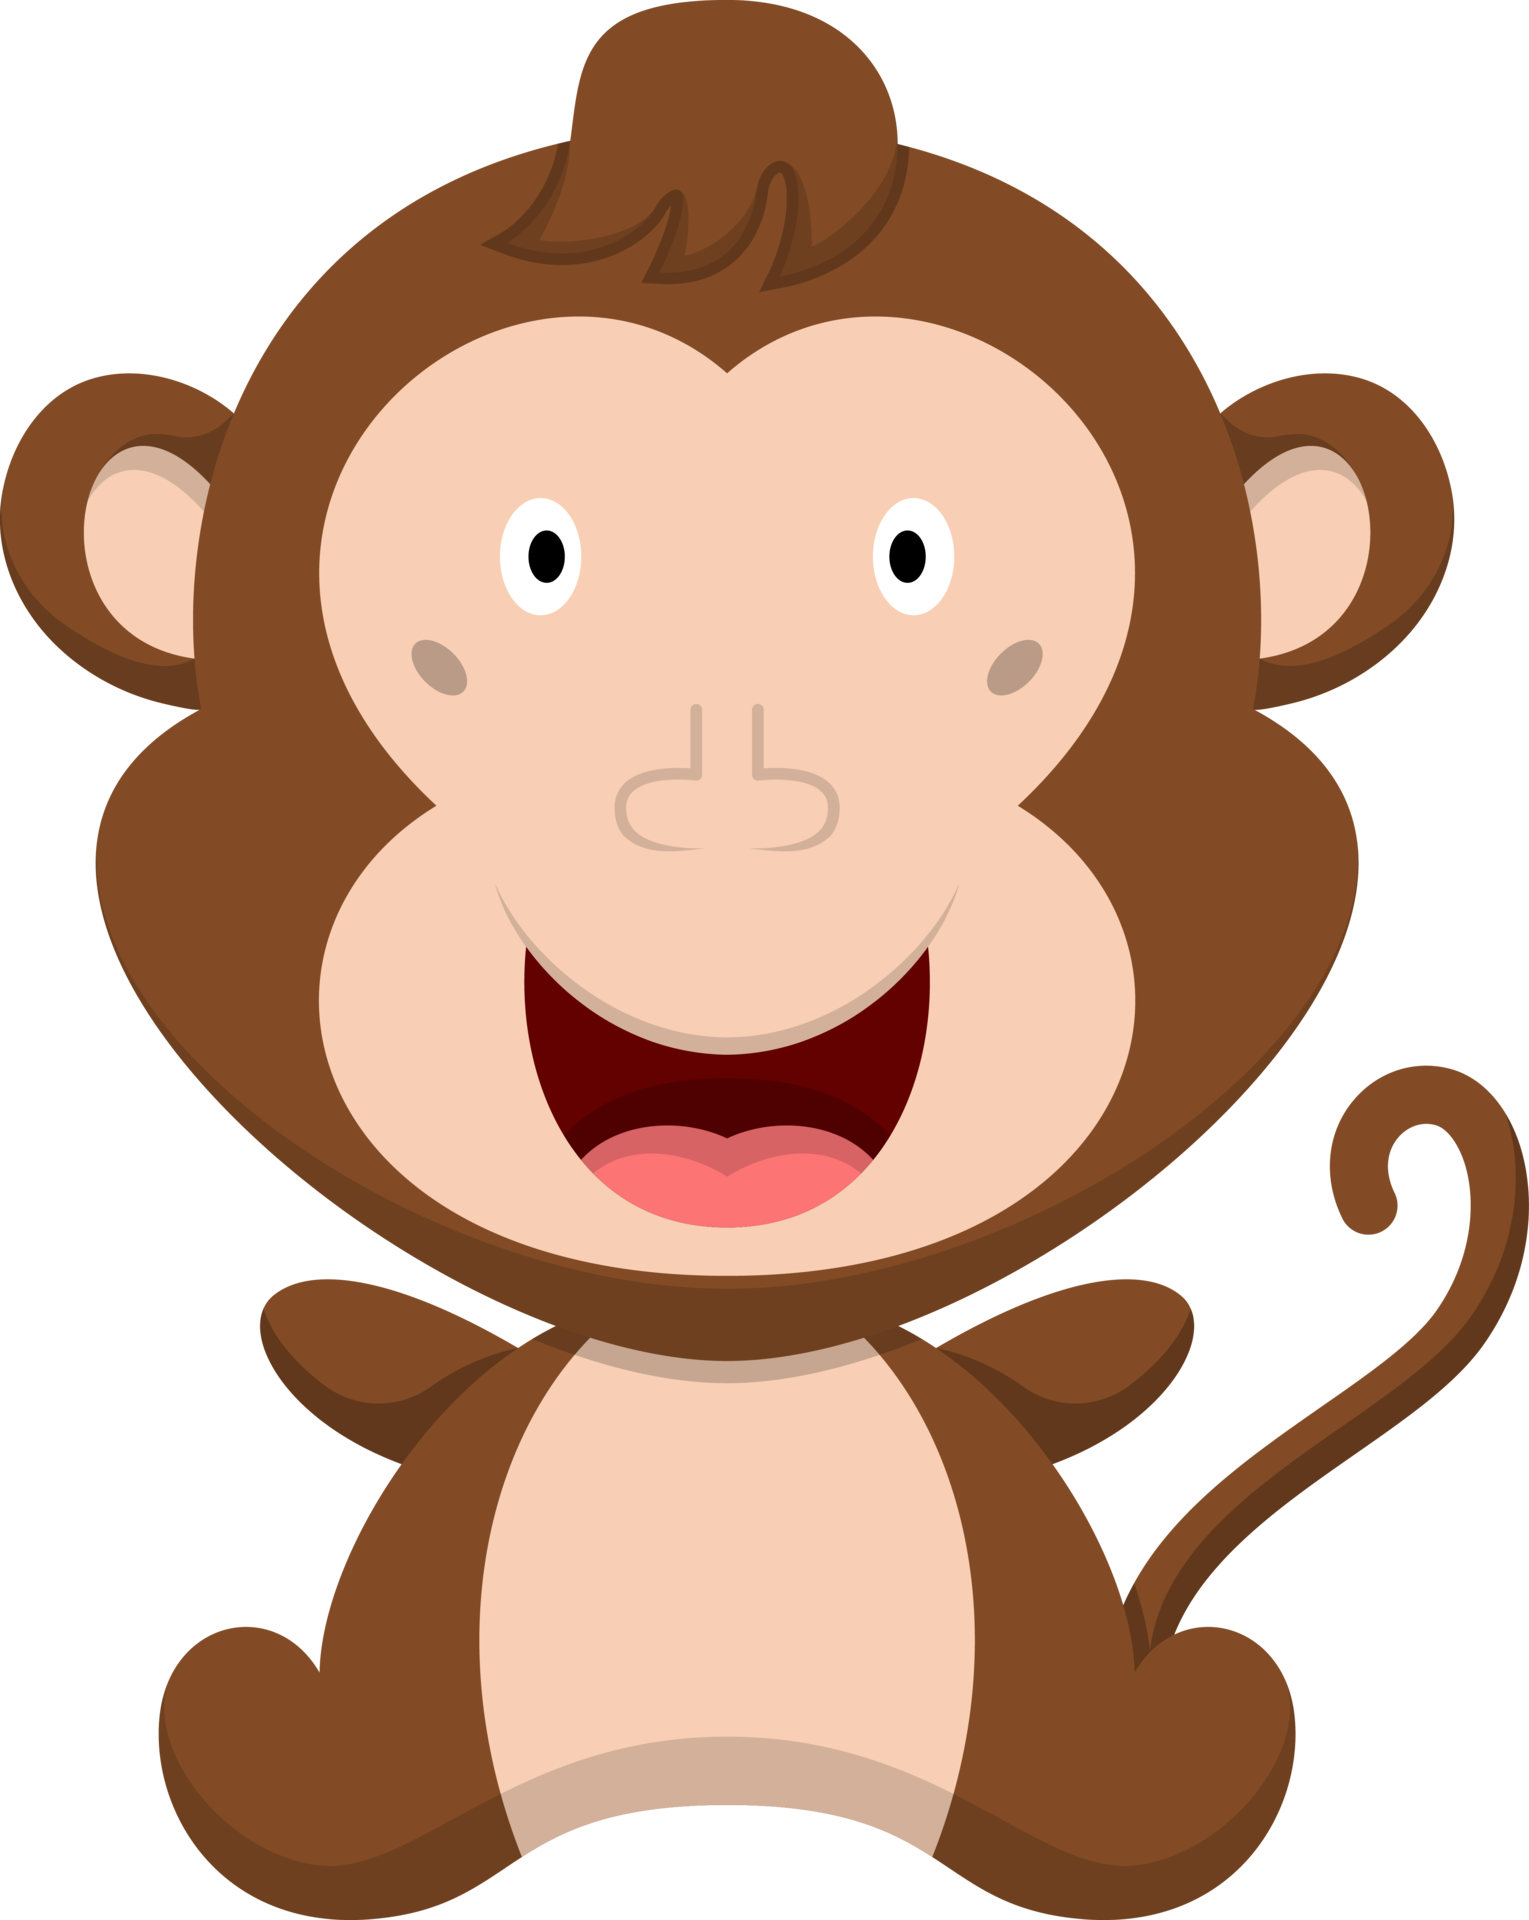 Monkey Cartoon PNG Free Images with Transparent Background - (325 Free  Downloads)